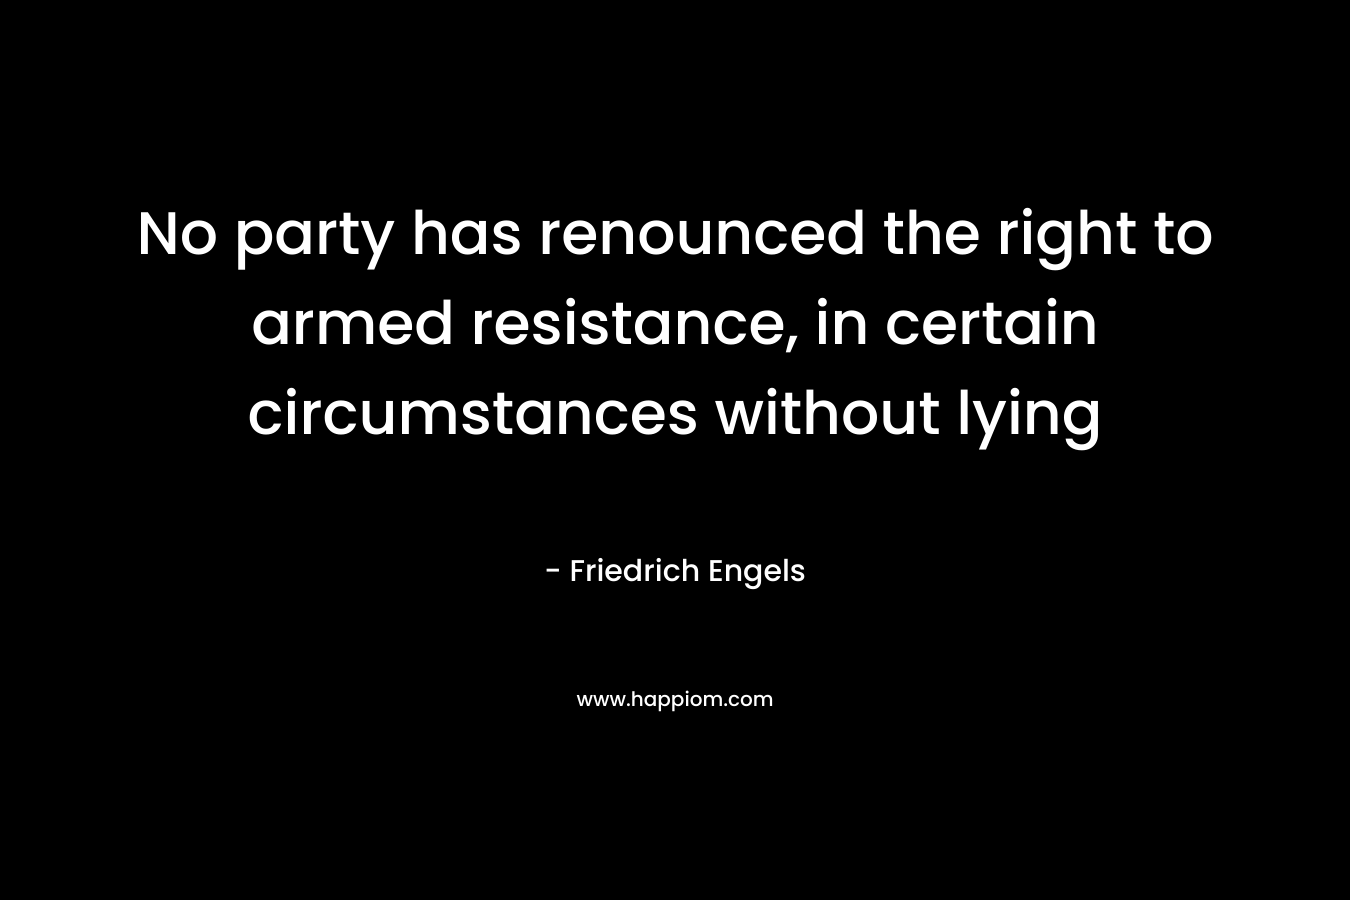 No party has renounced the right to armed resistance, in certain circumstances without lying – Friedrich Engels